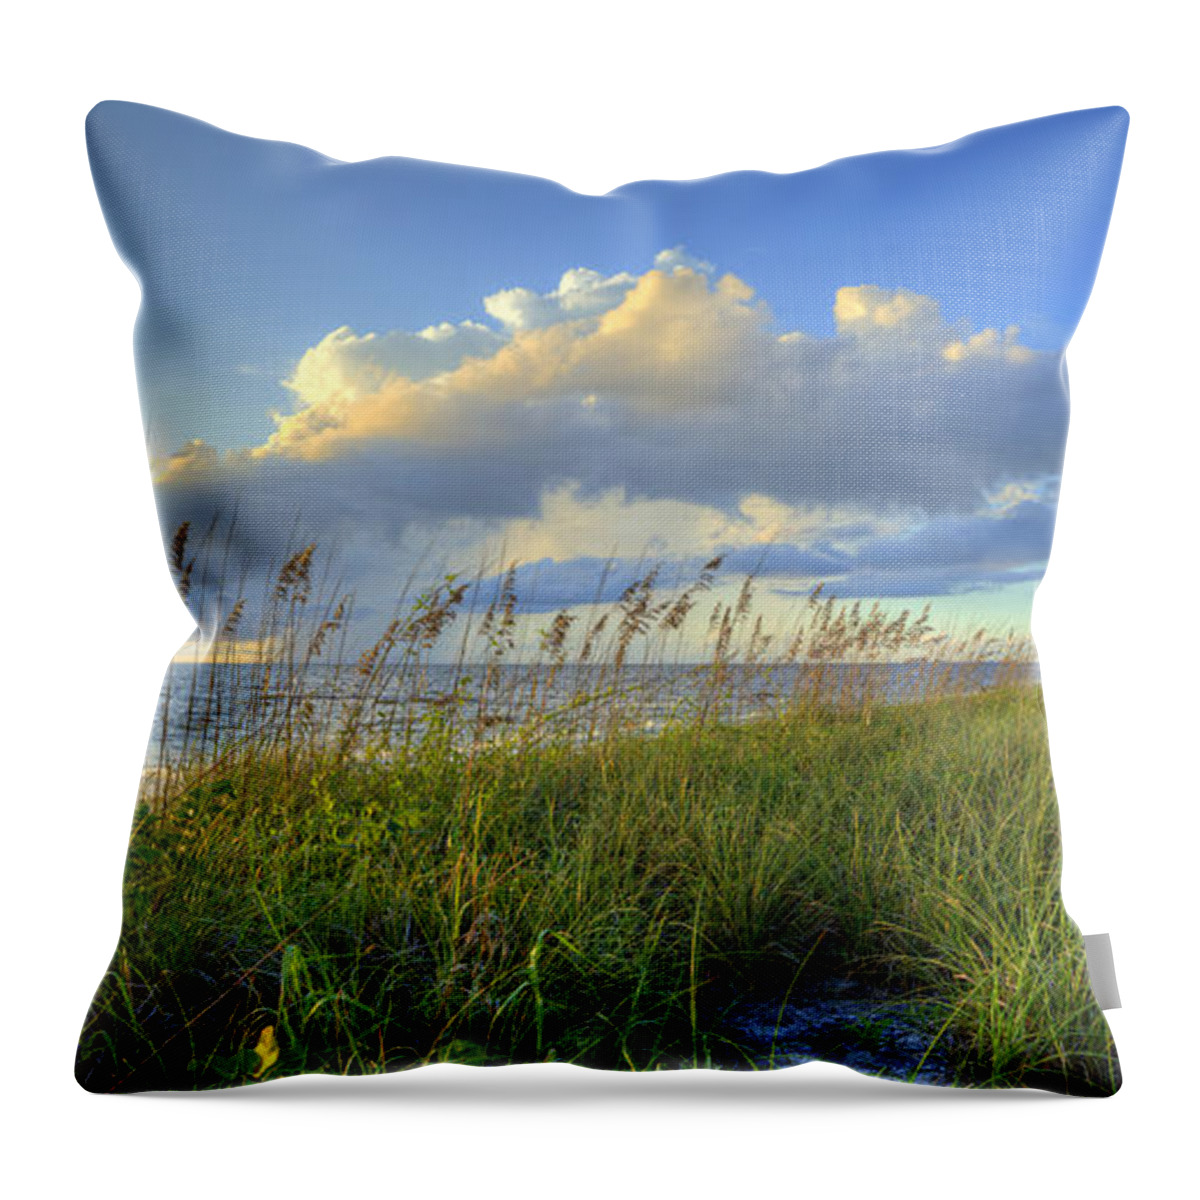 Southwest Throw Pillow featuring the photograph Sea Oats by Sean Allen